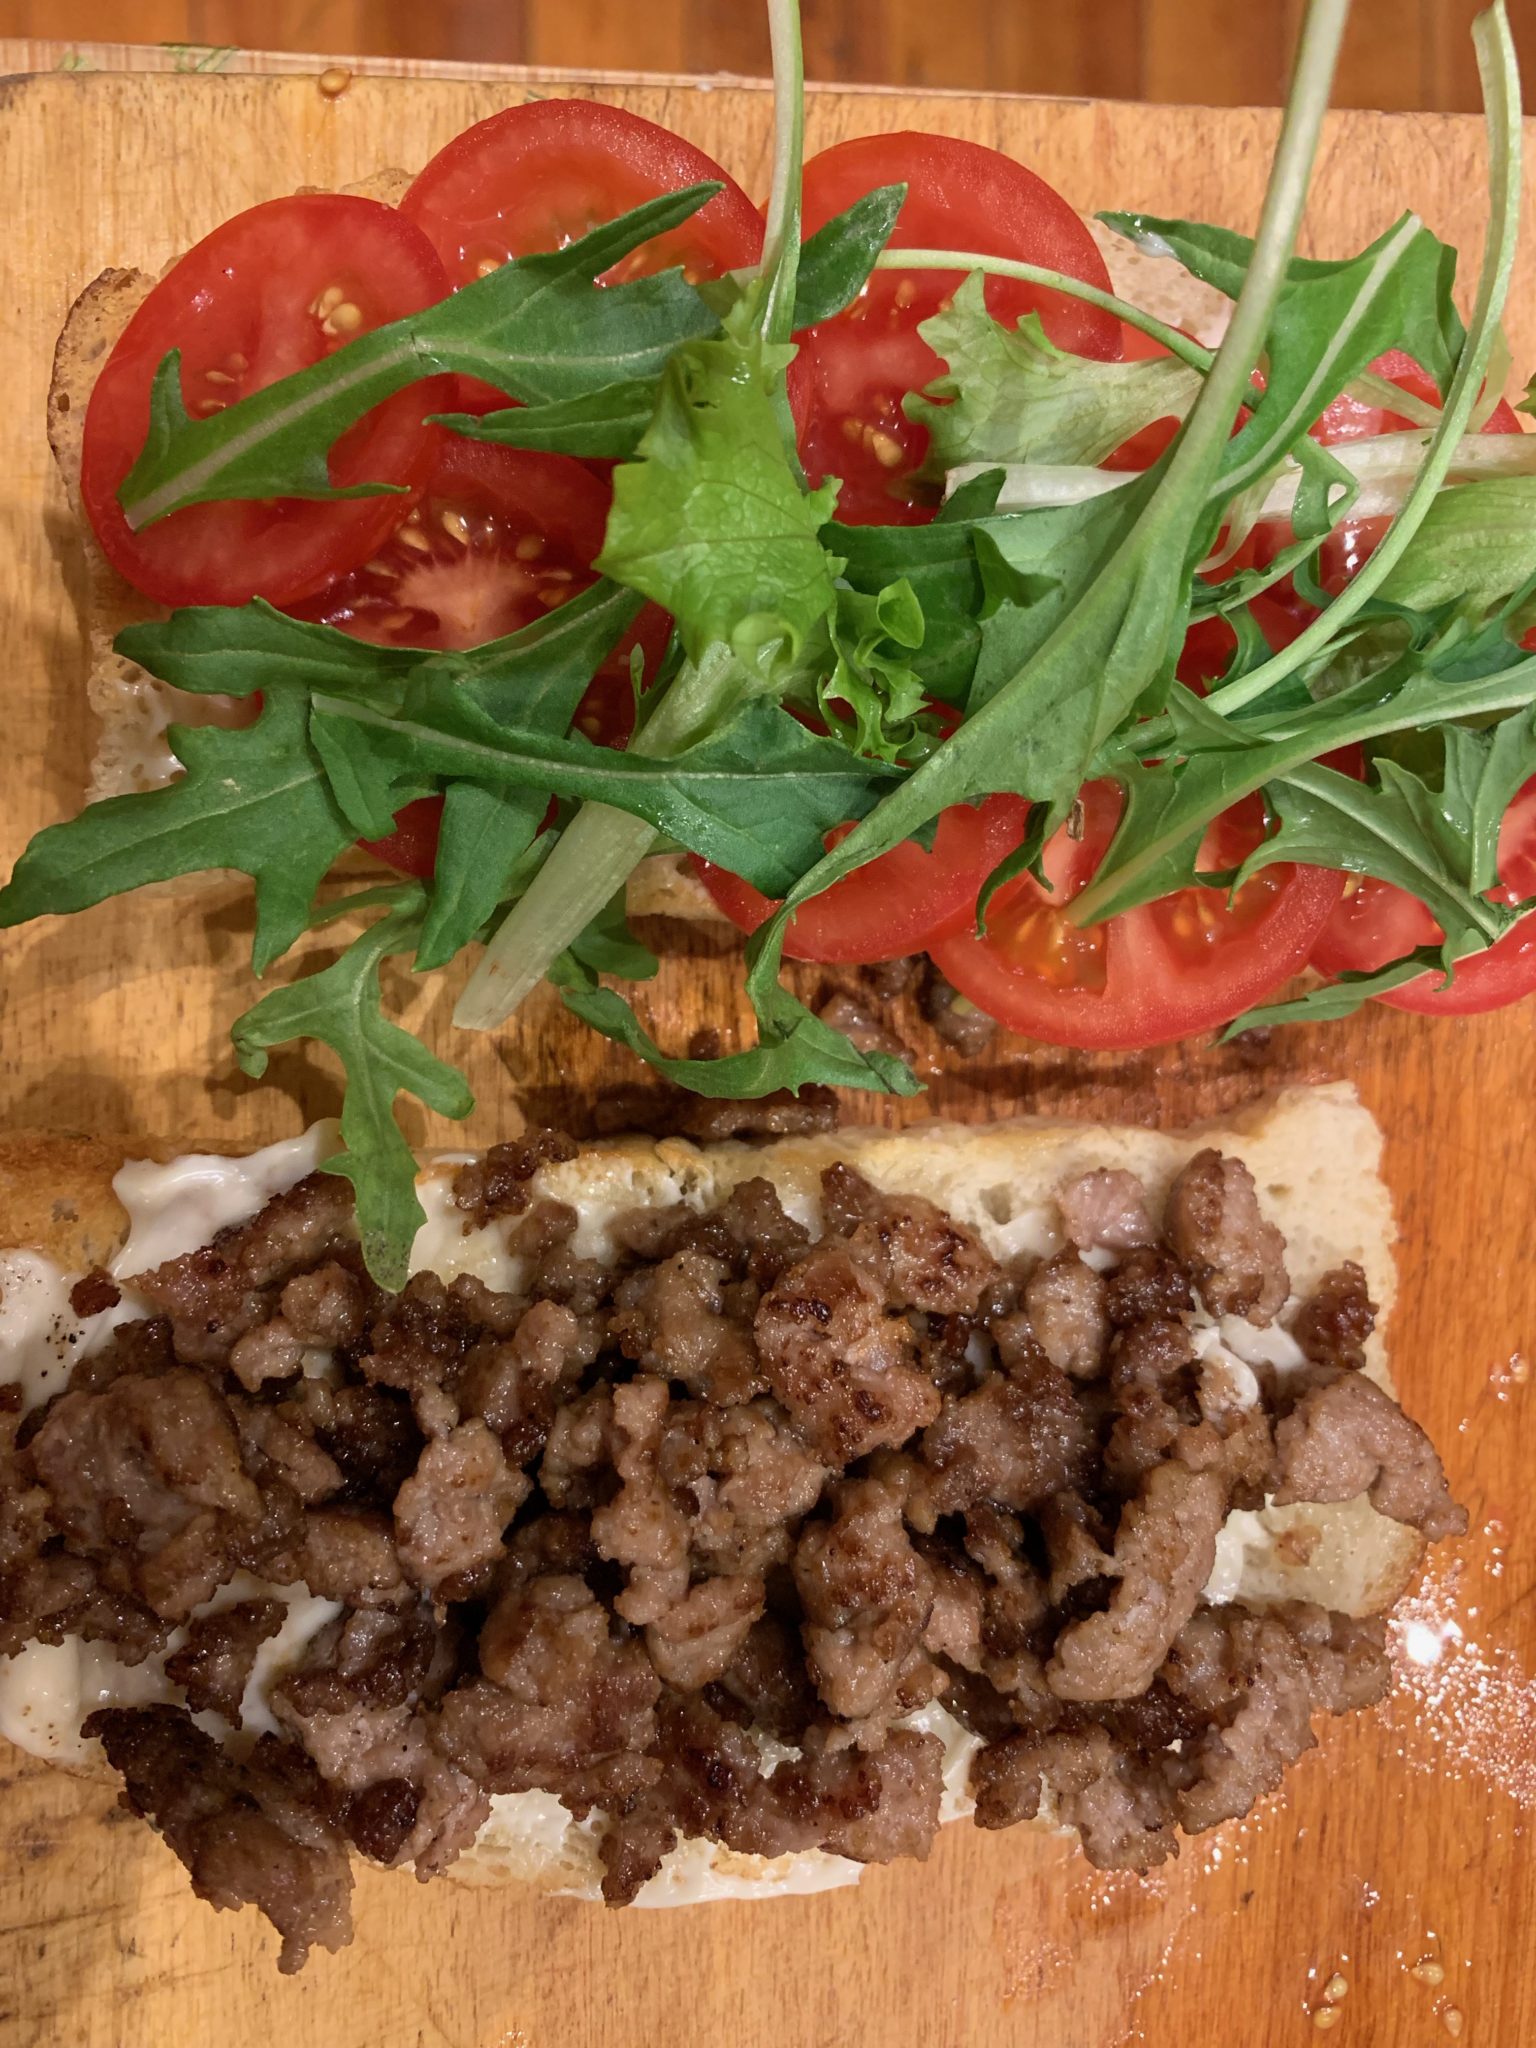 two slices of bread topped with ground pork, tomato and arugula